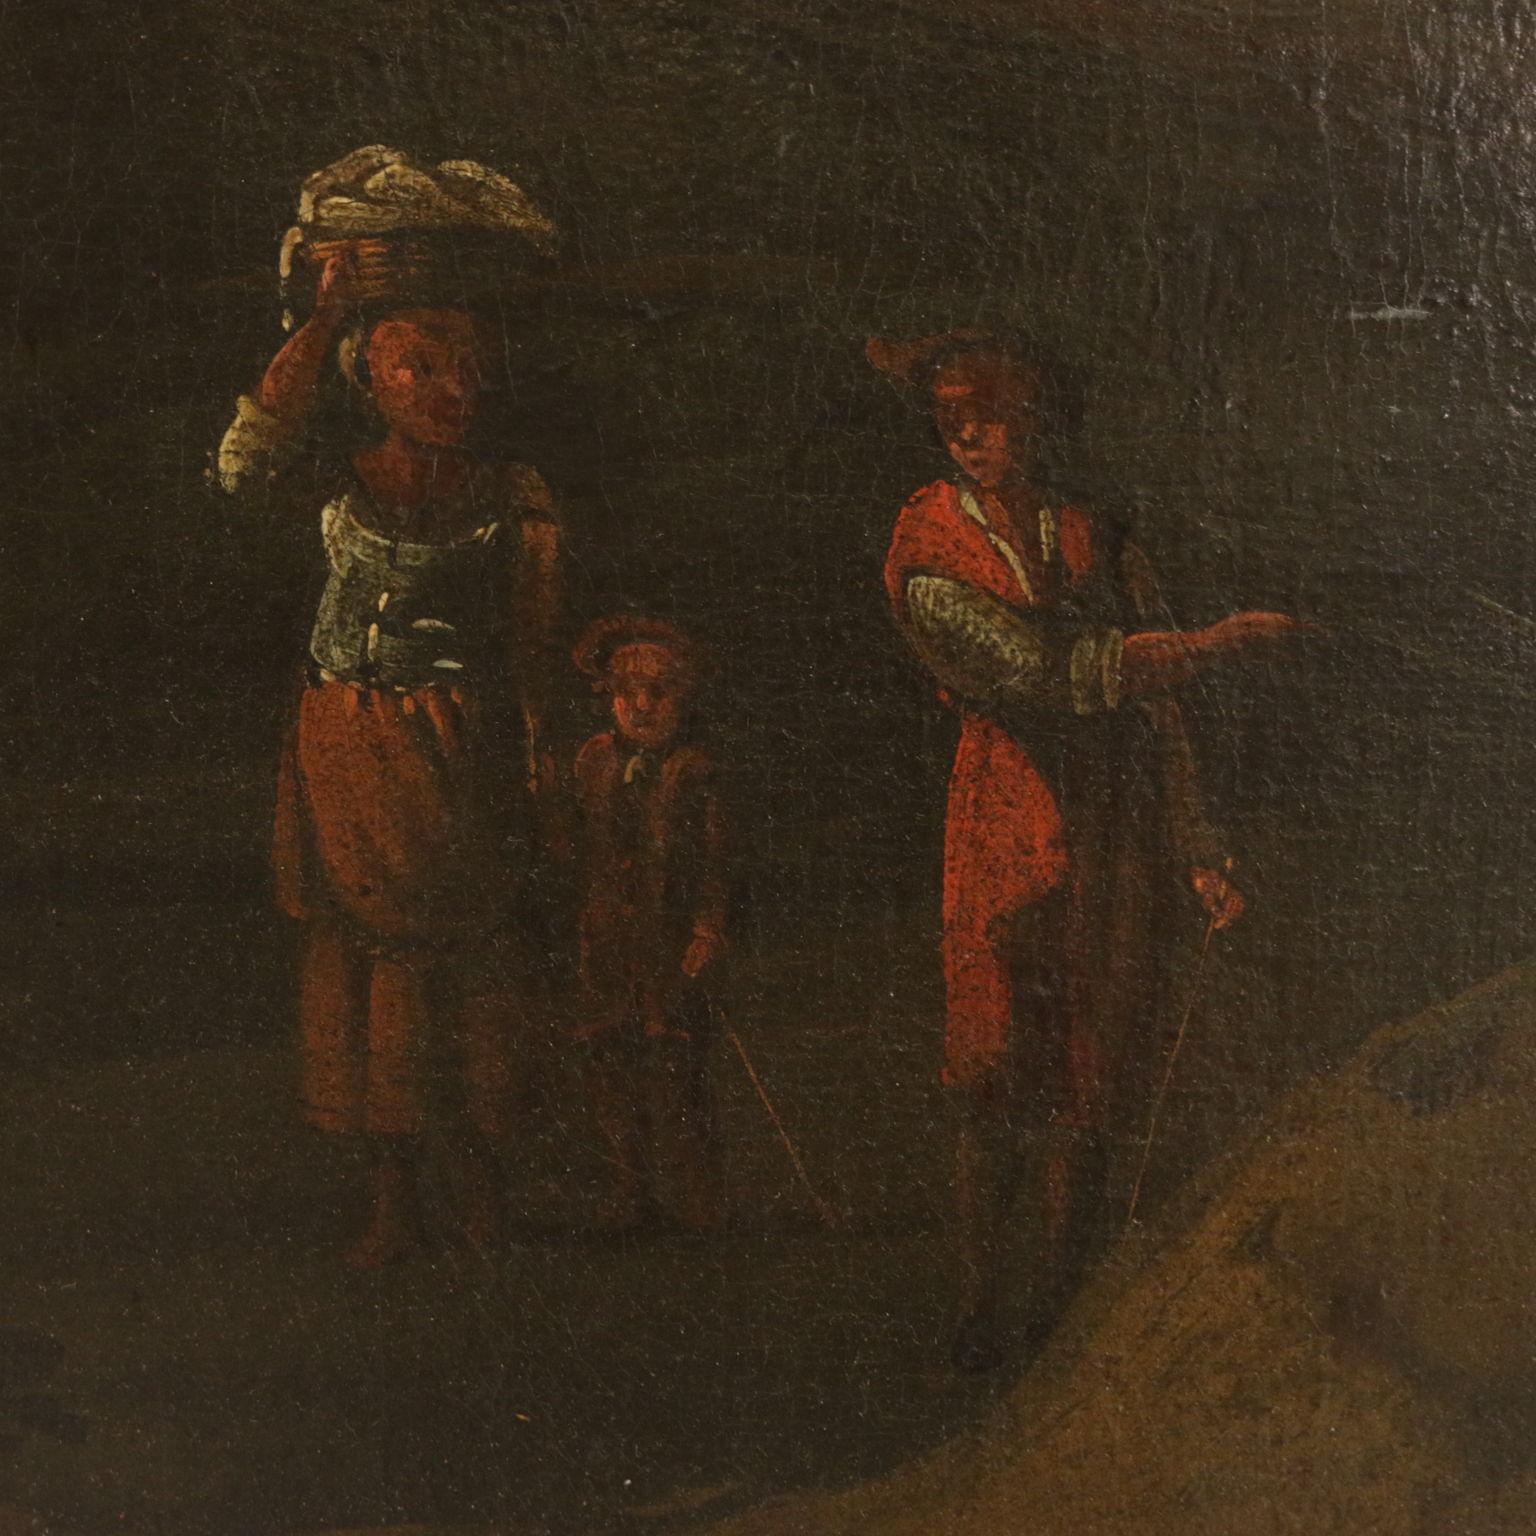 Landscape with Figures, Oil on Canvas, Italian School 18th Century - Brown Landscape Painting by Unknown